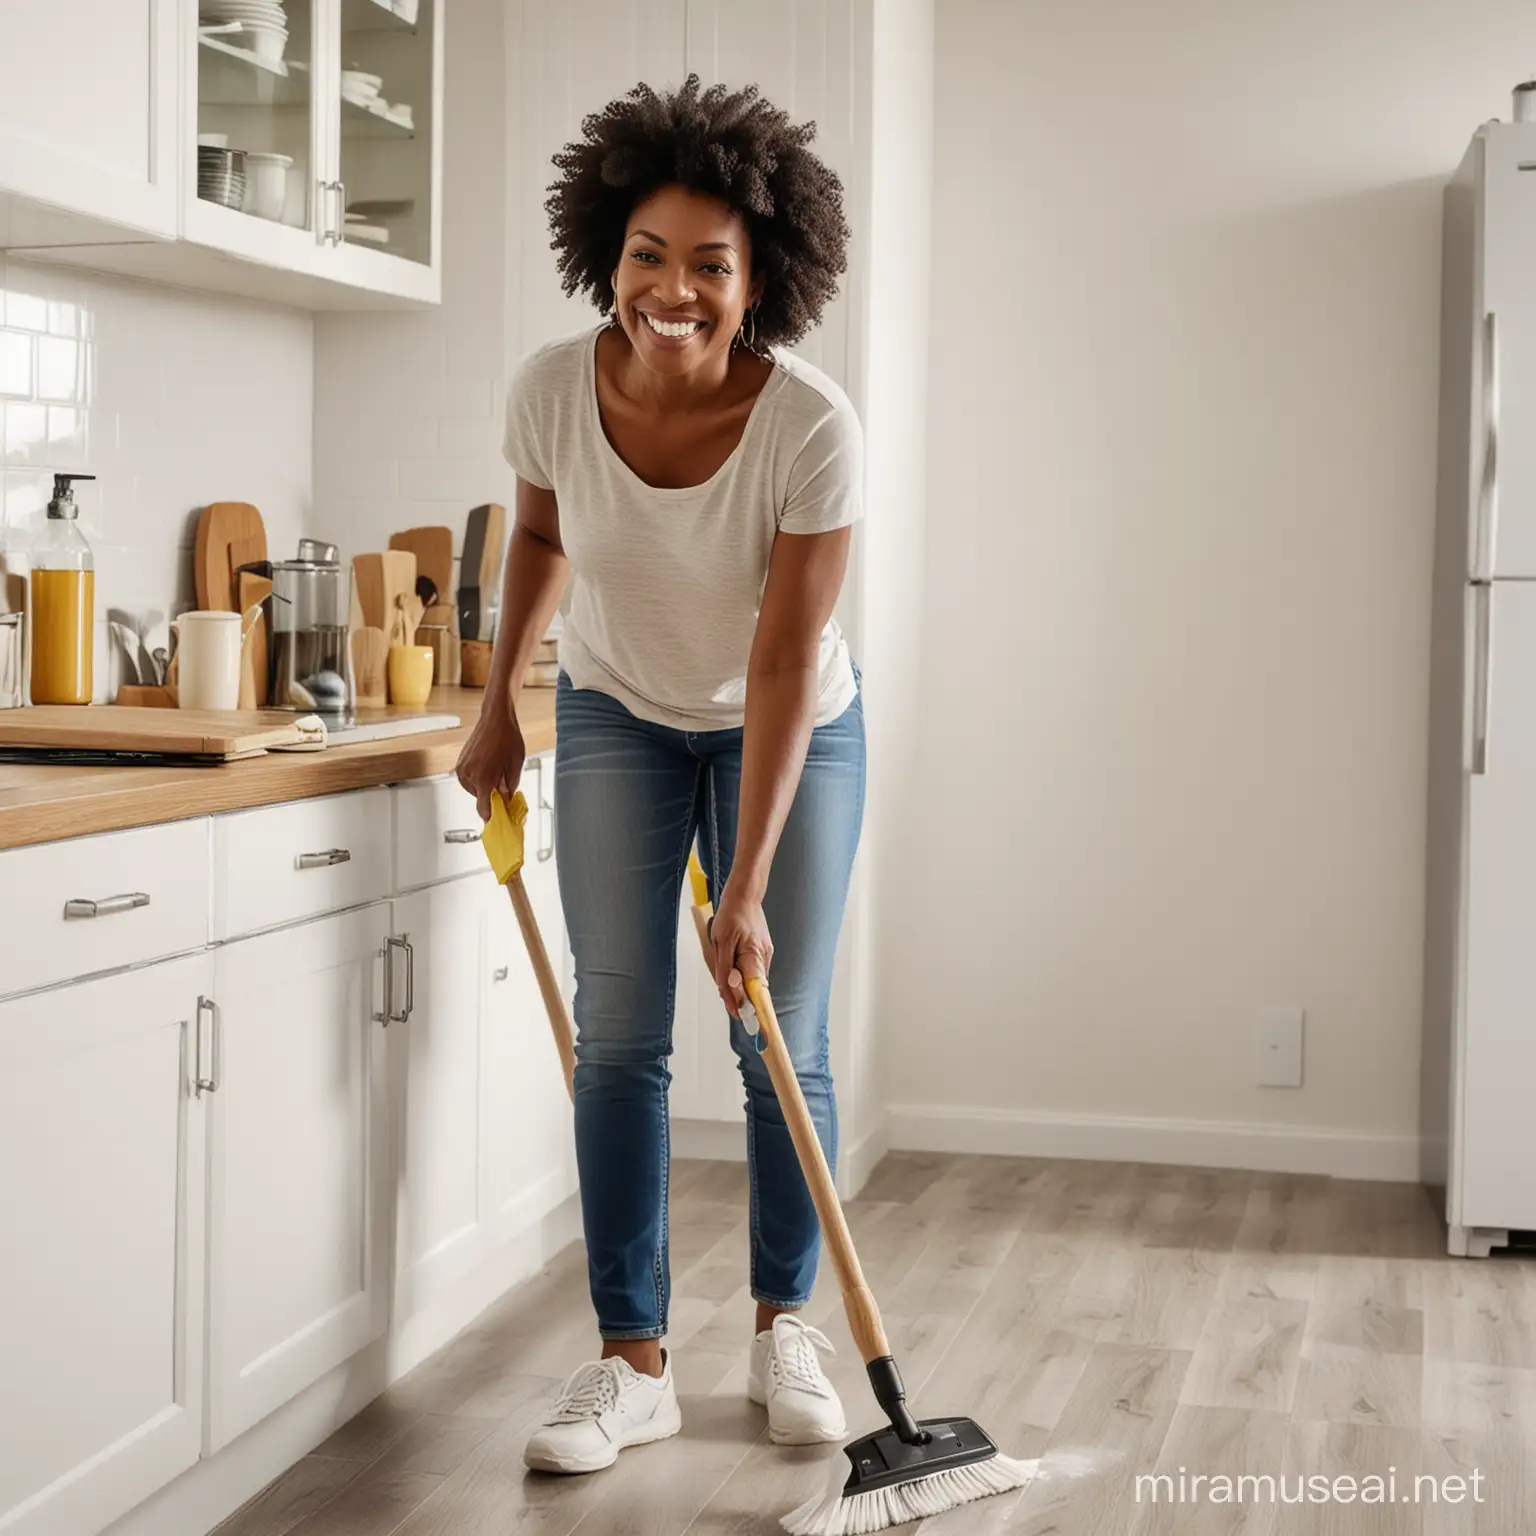 Middle Aged Black Woman Cleaning Kitchen with a Broom